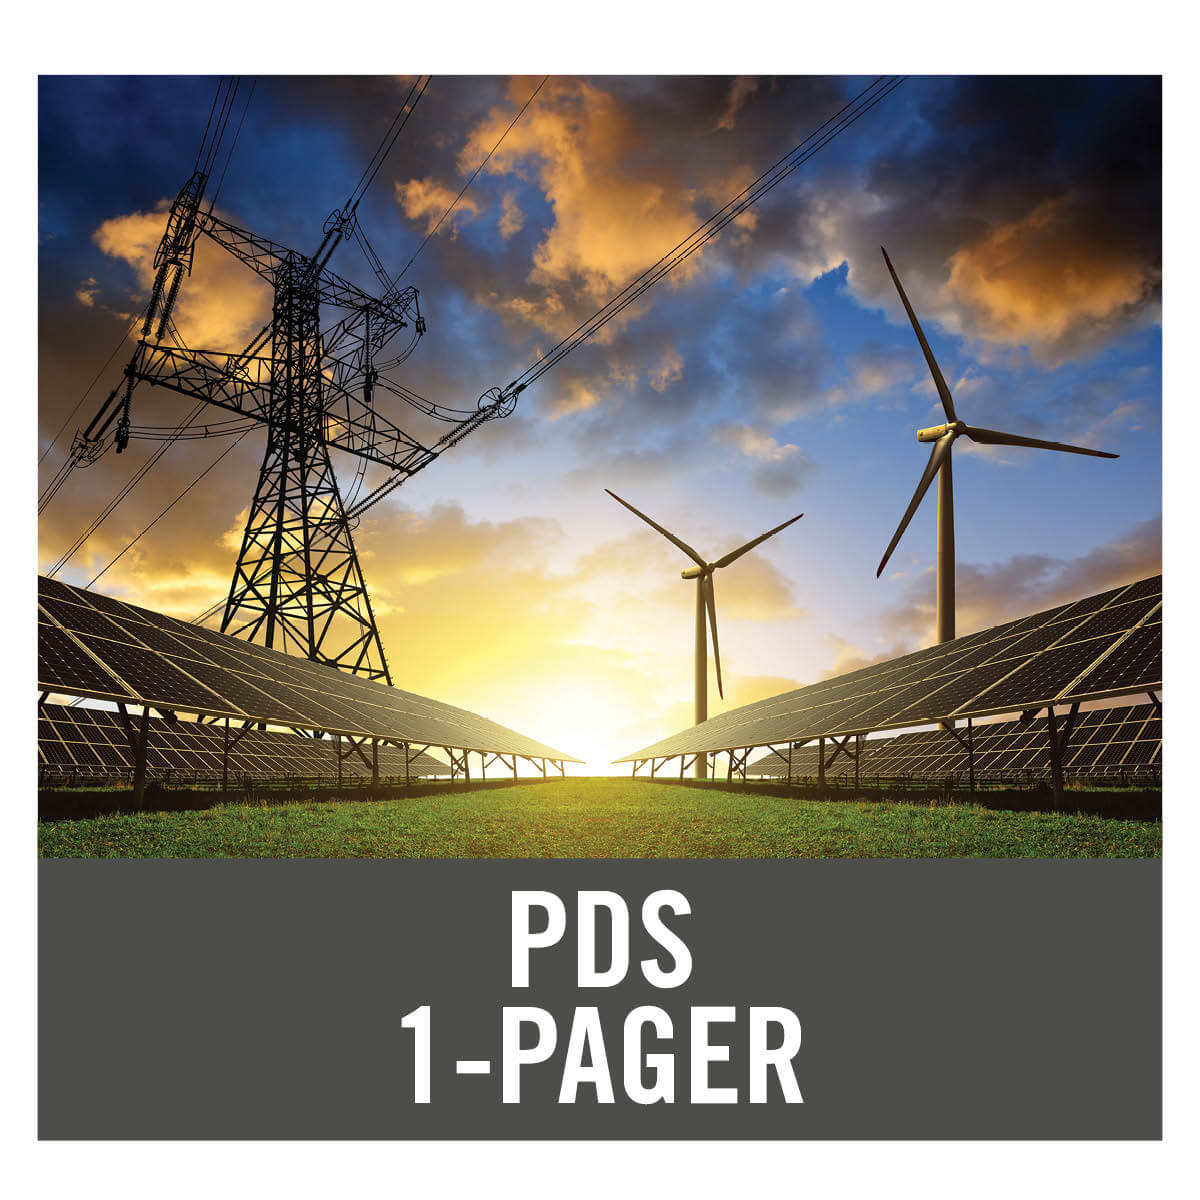 power lines and wind turbines with label of PDS 1 Pager